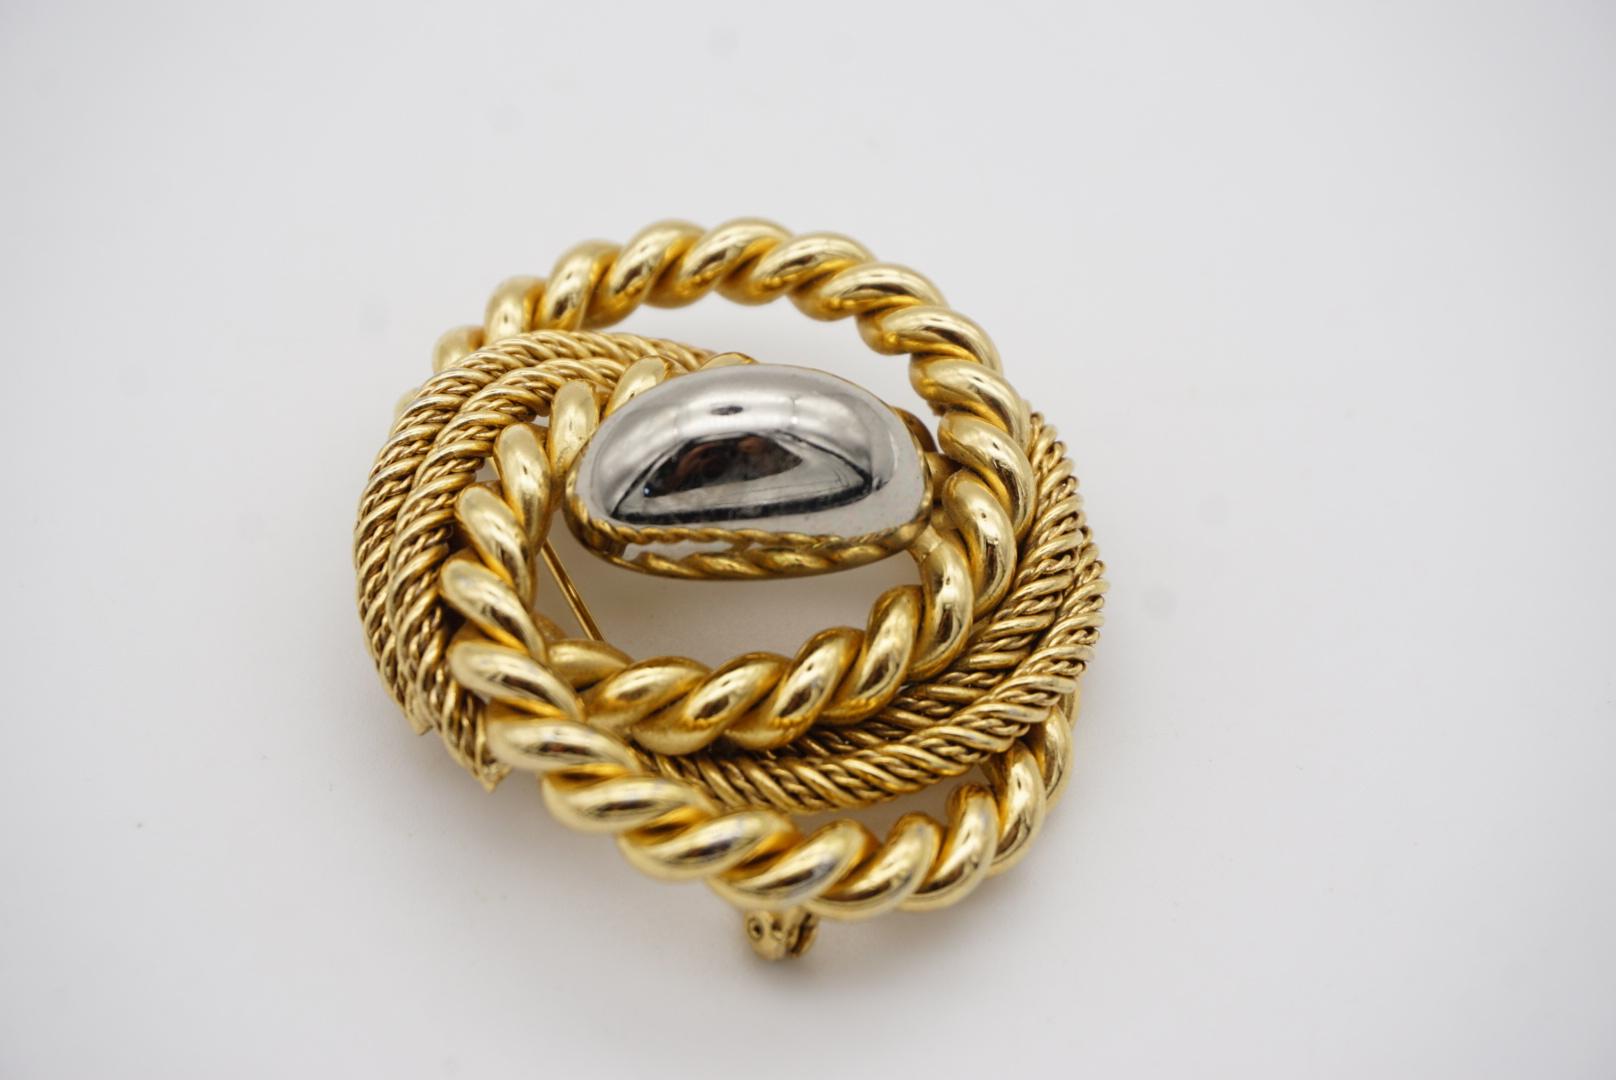 Christian Dior GROSSE 1969 Vintage Large Chunky Swirl Twist Gold Silver Brooch For Sale 4